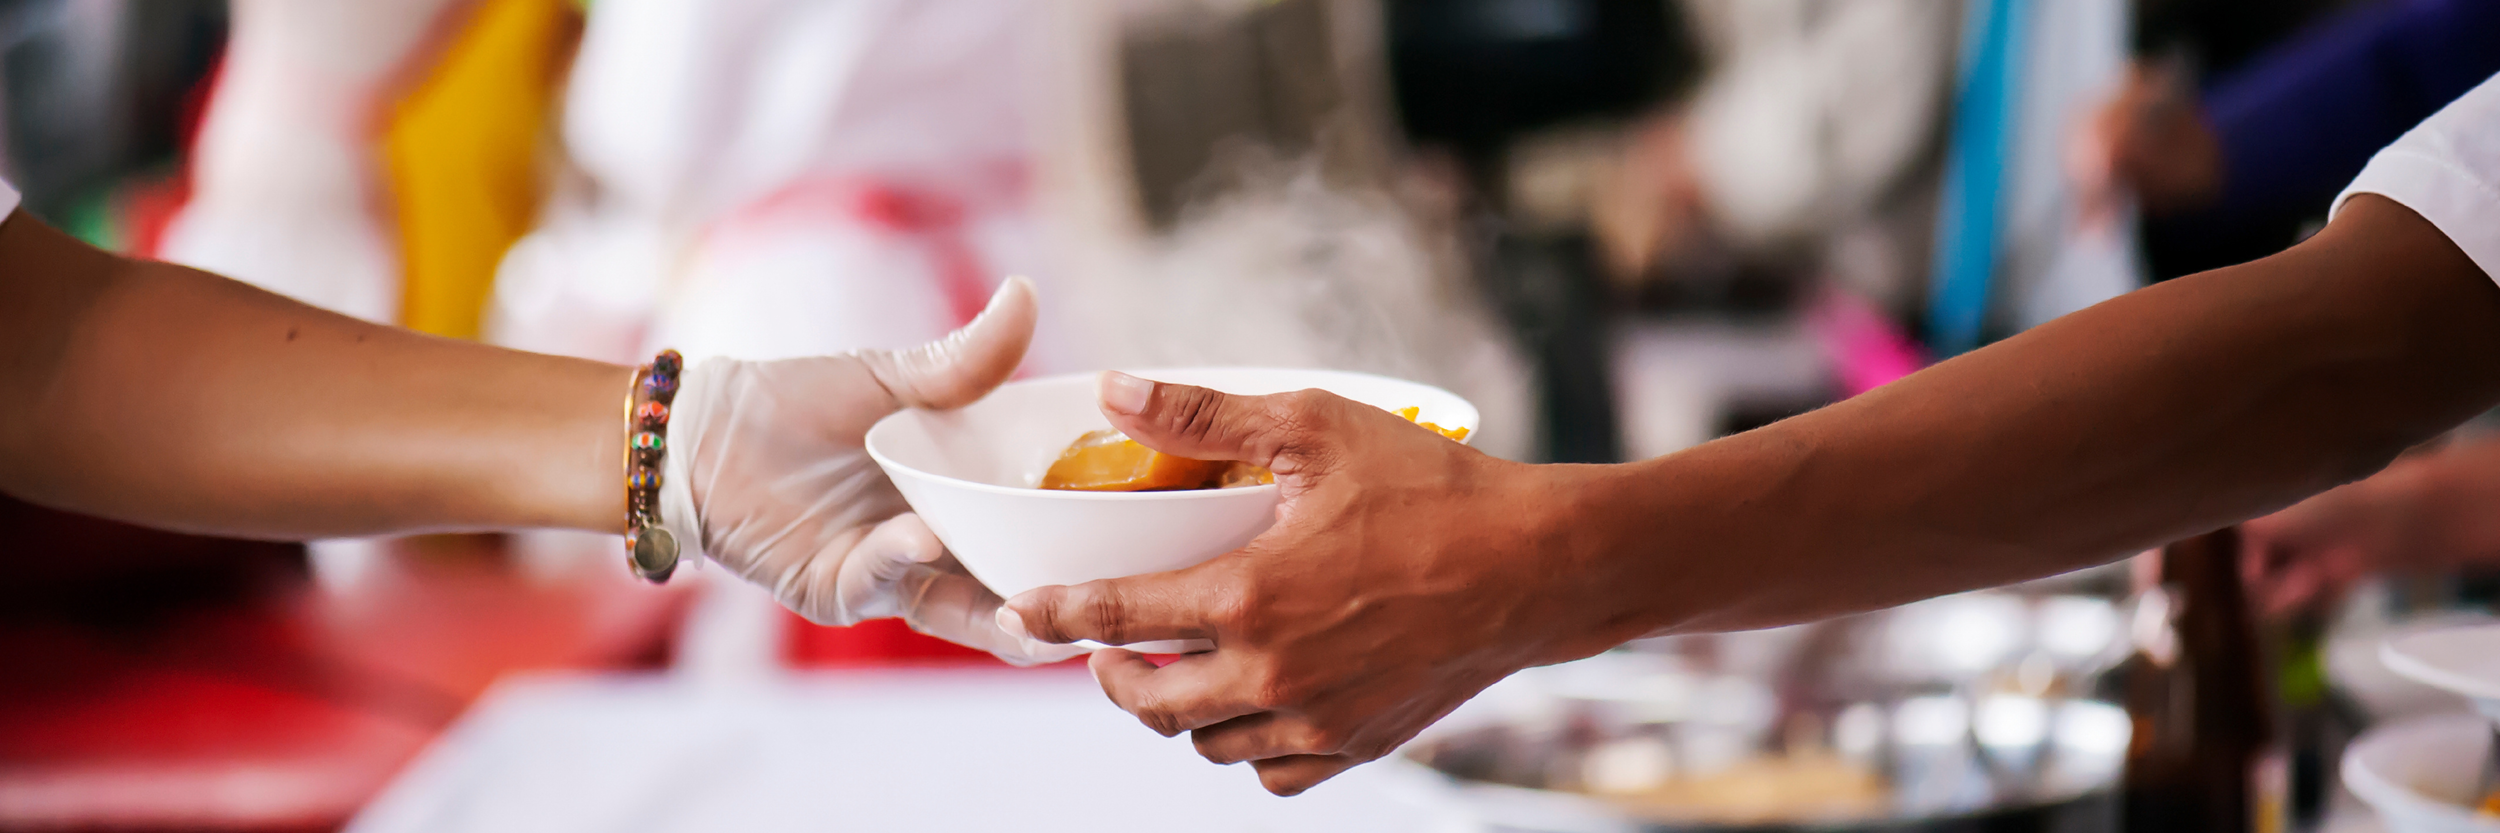 A hand is seen giving a bowl of food to another hand.